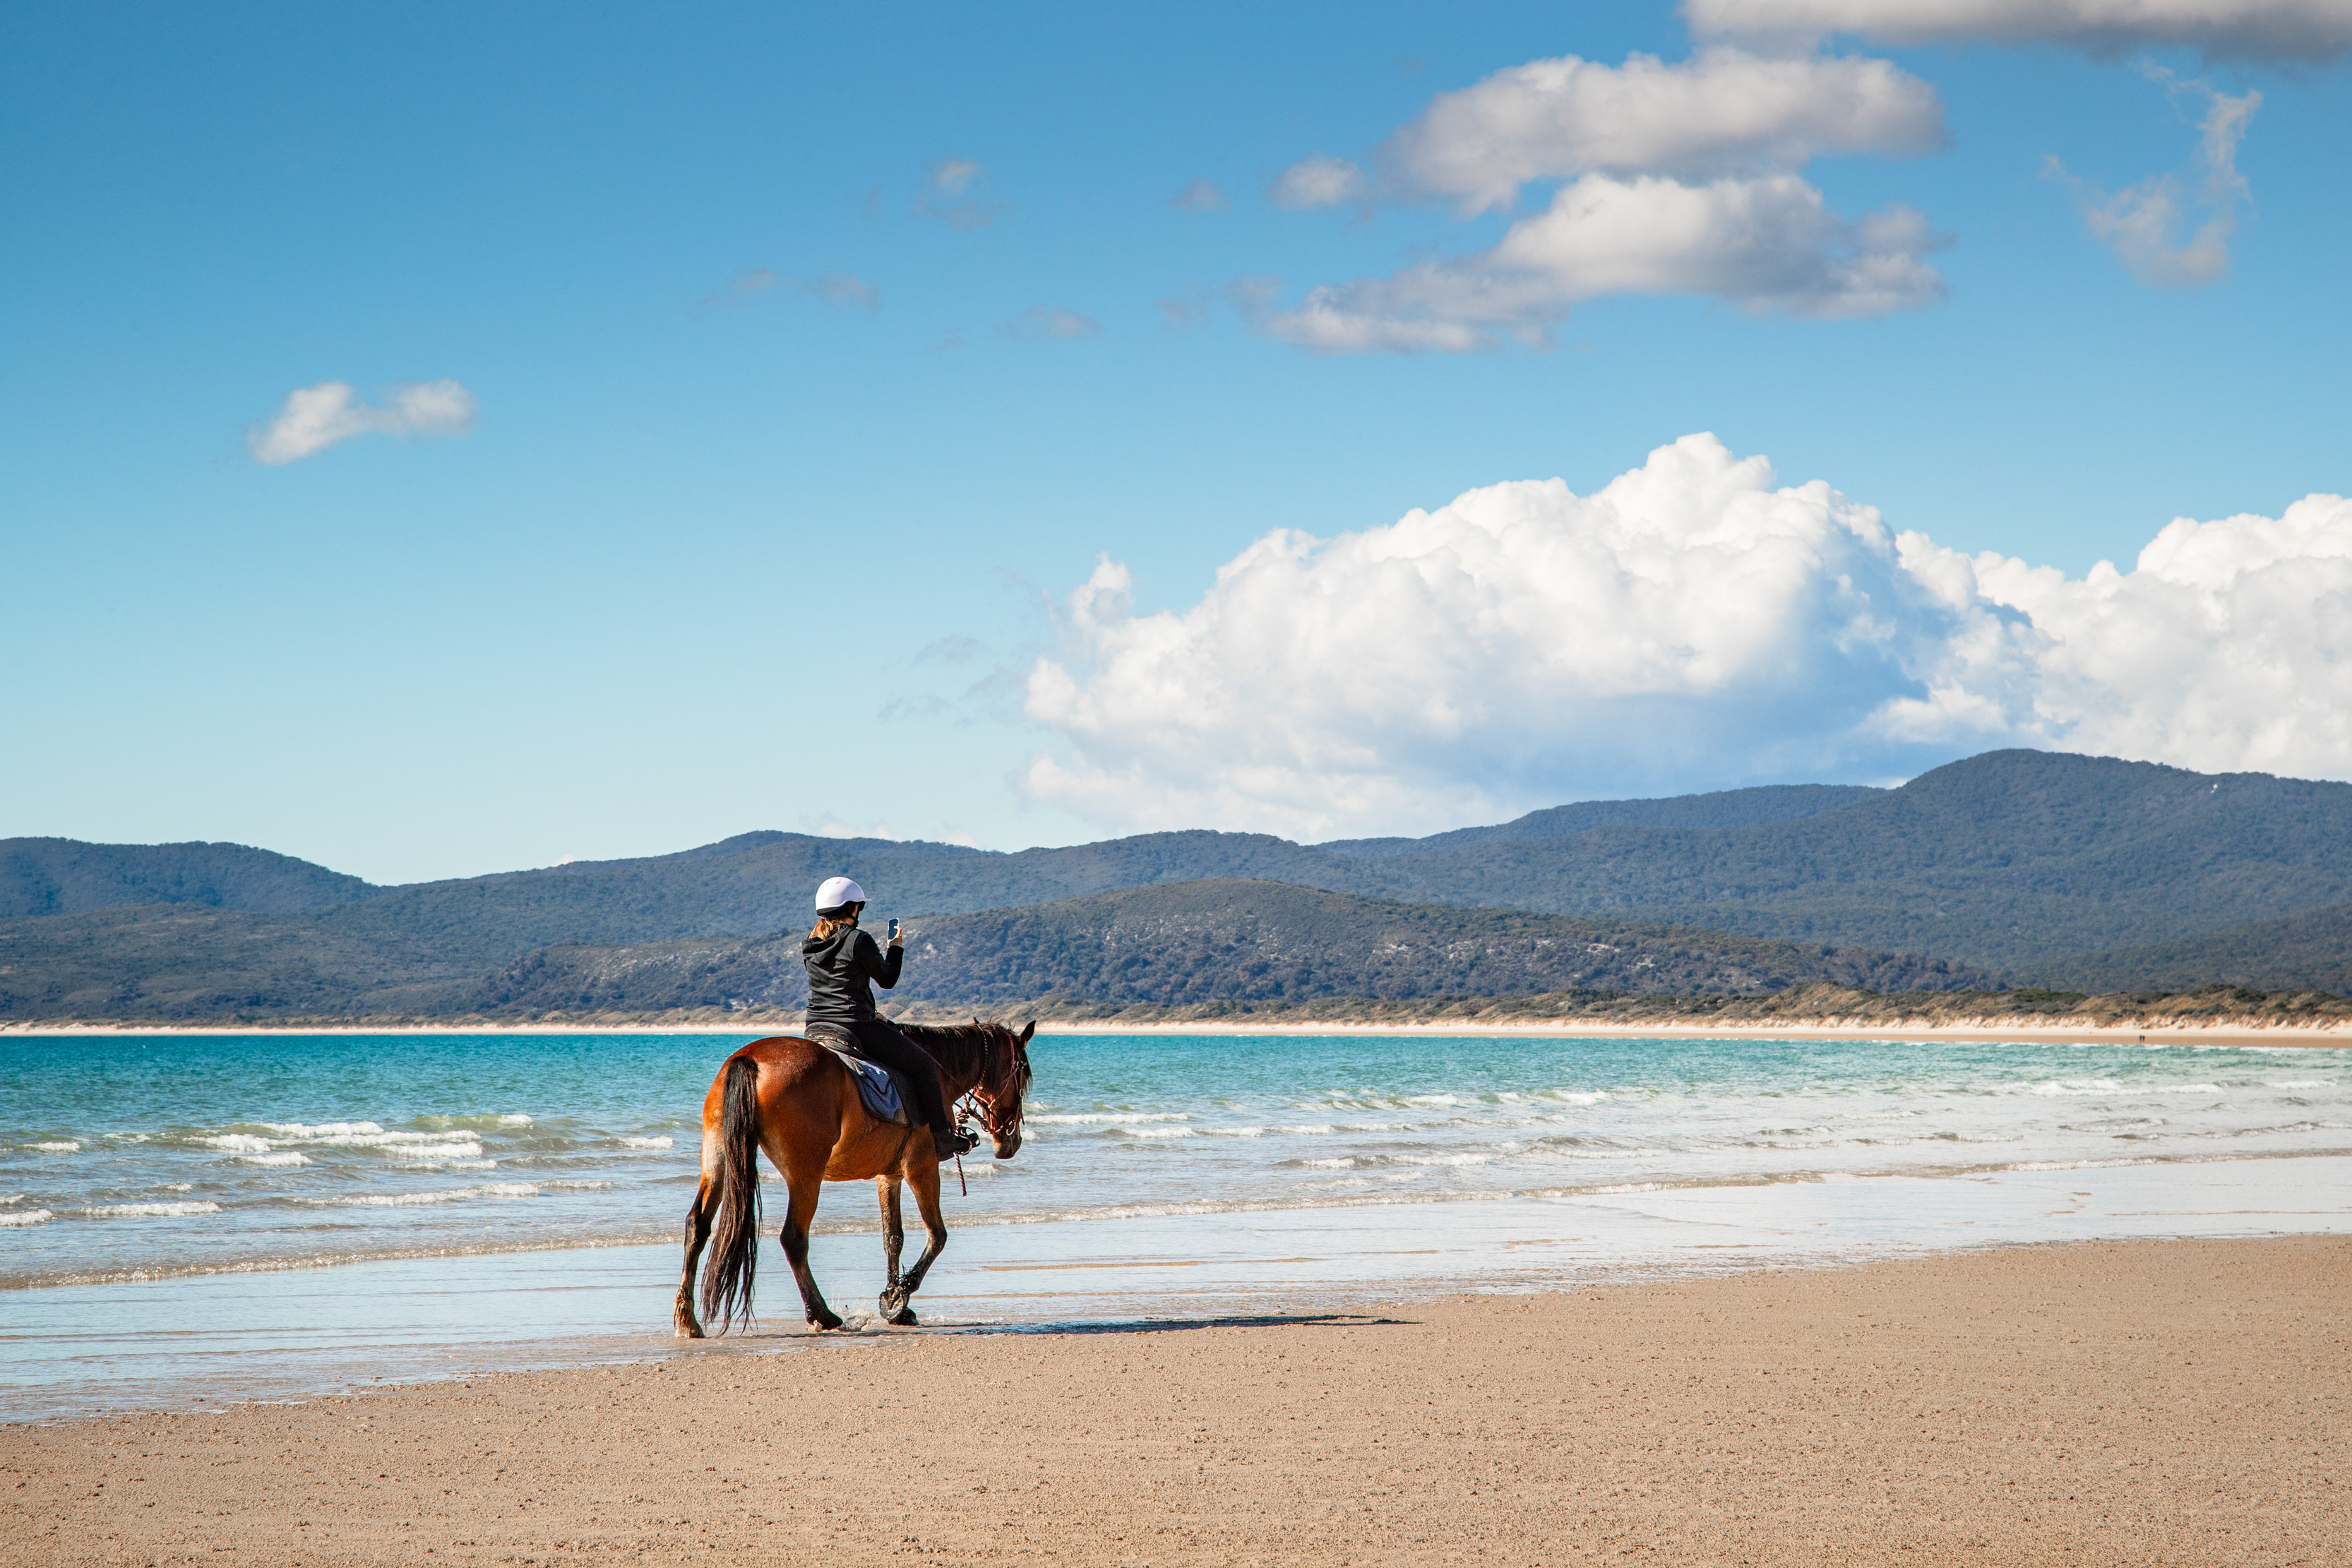 "Stunning image of a person horse riding on Bakers Beach, Narawntapu National Park, taken on a clear, sunny day. "